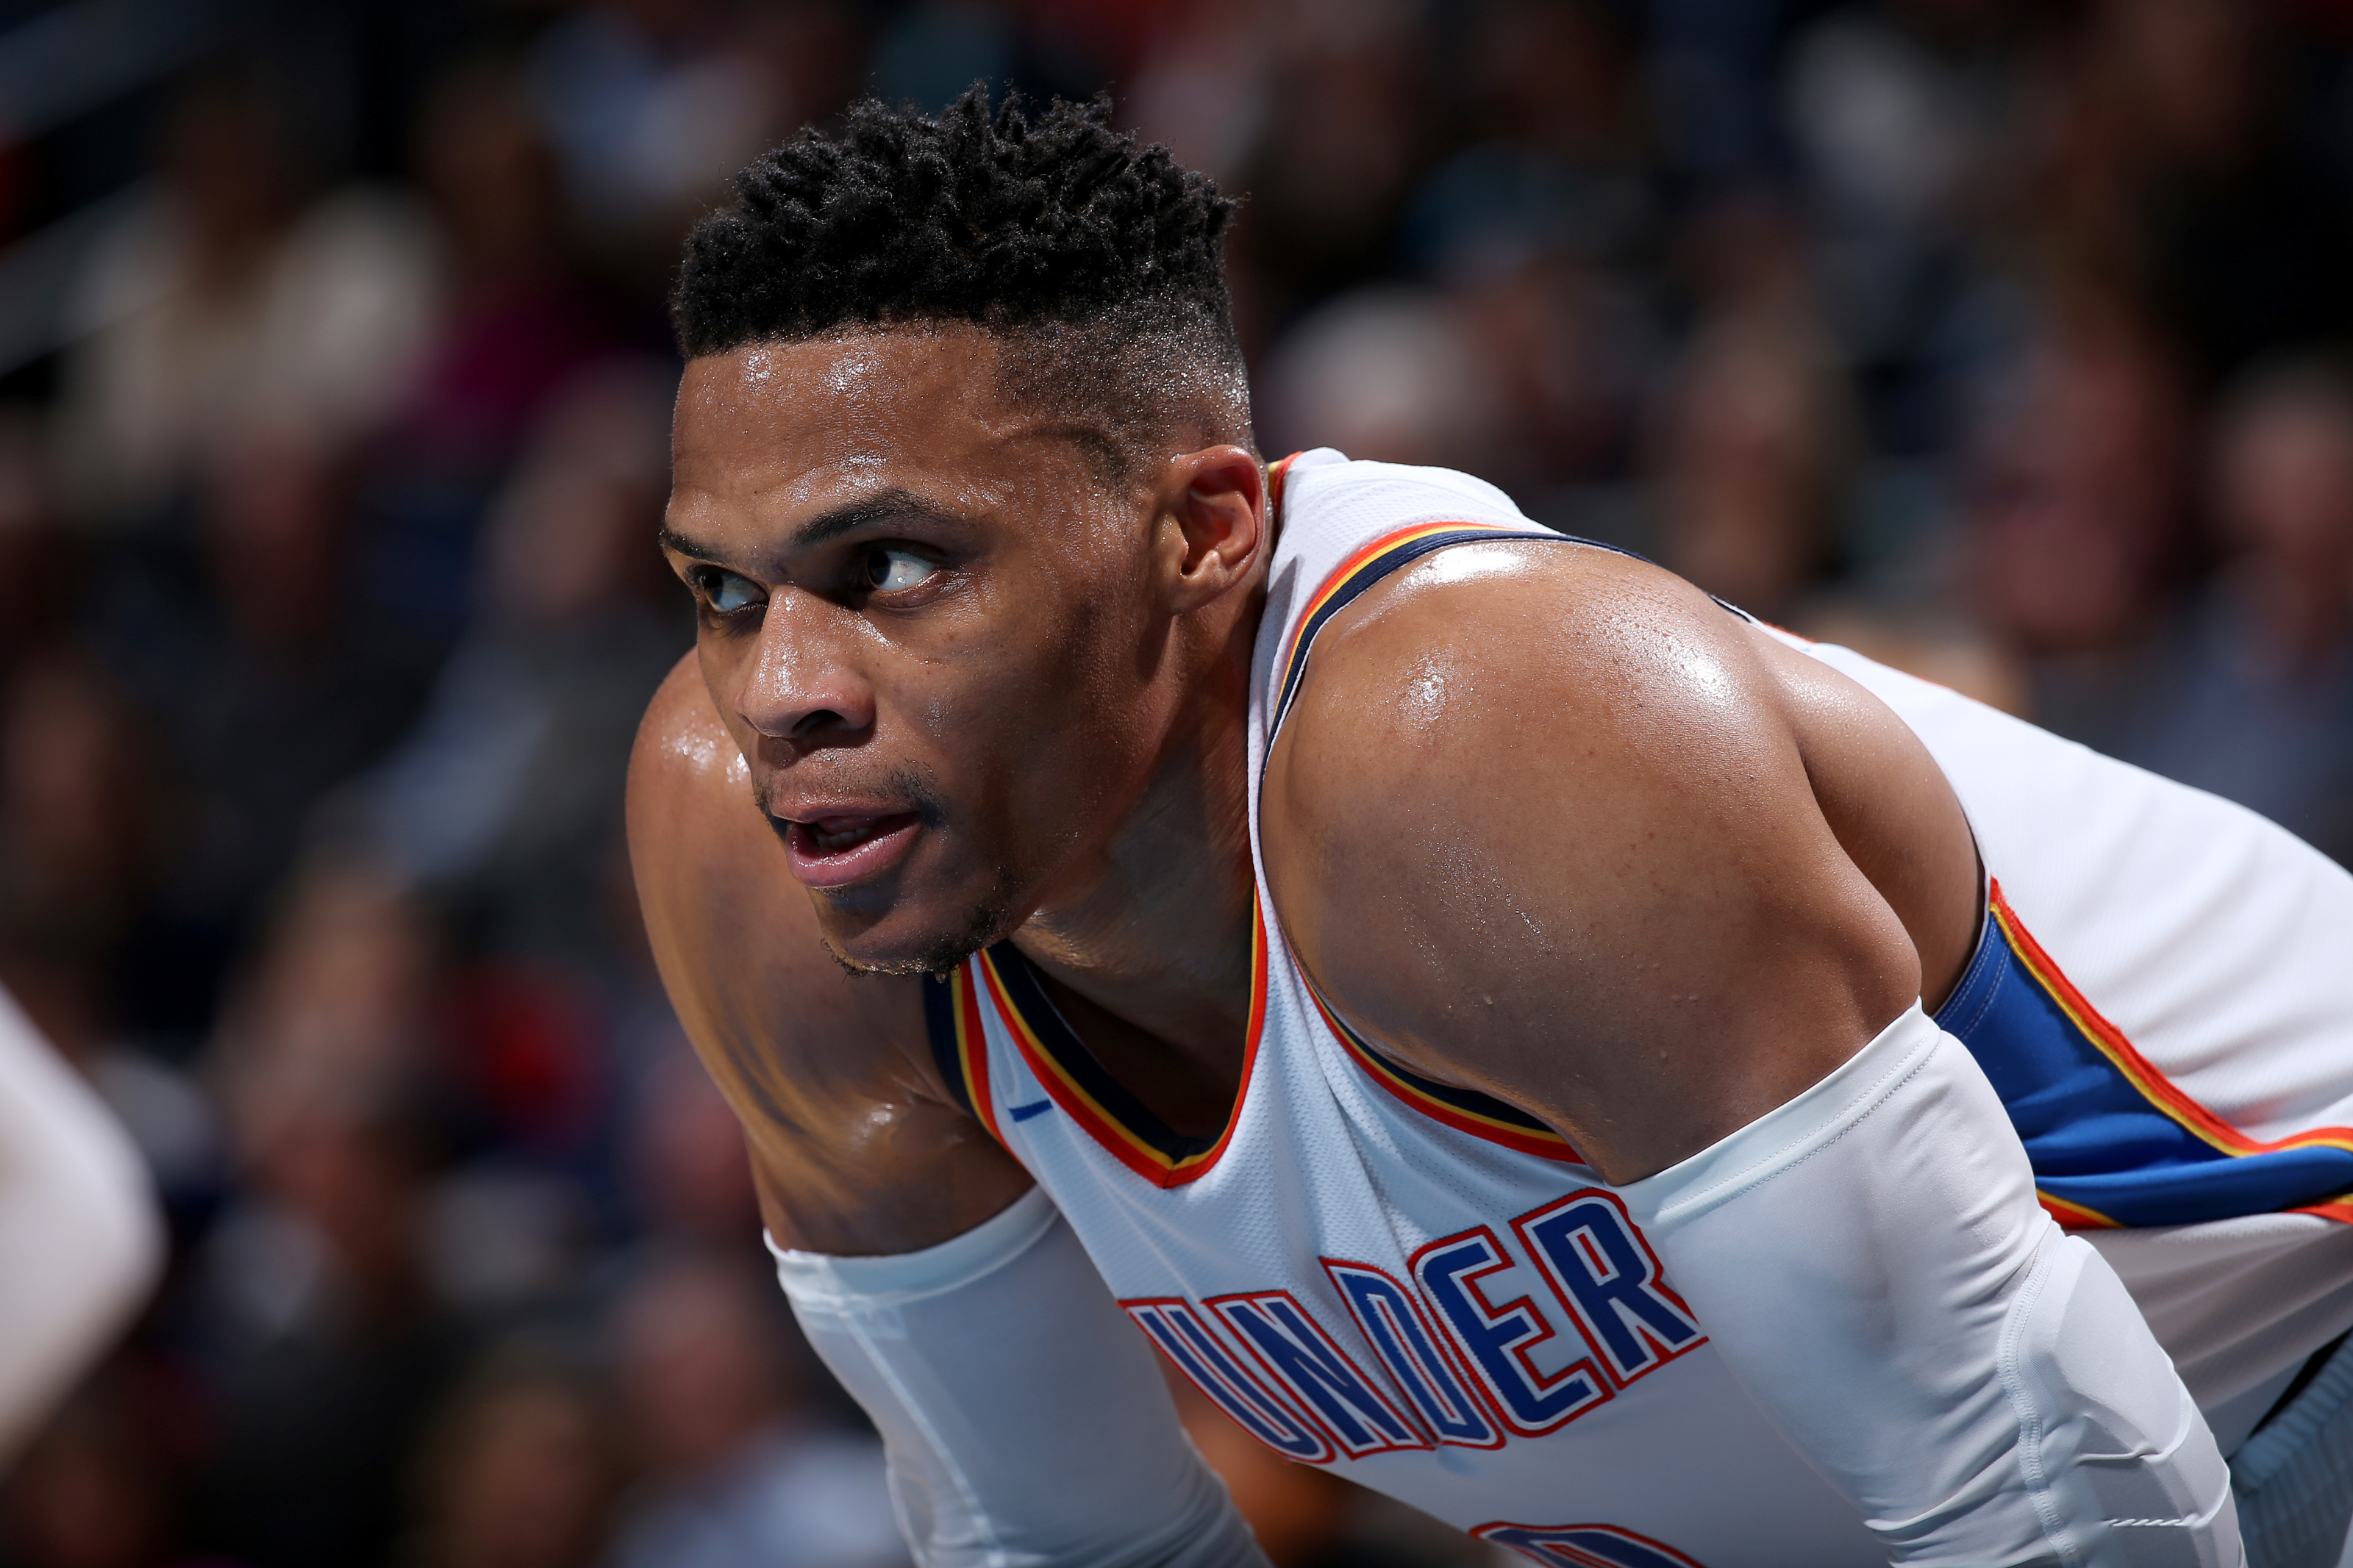 Fans appreciate Russell Westbrook's energy during his historic run